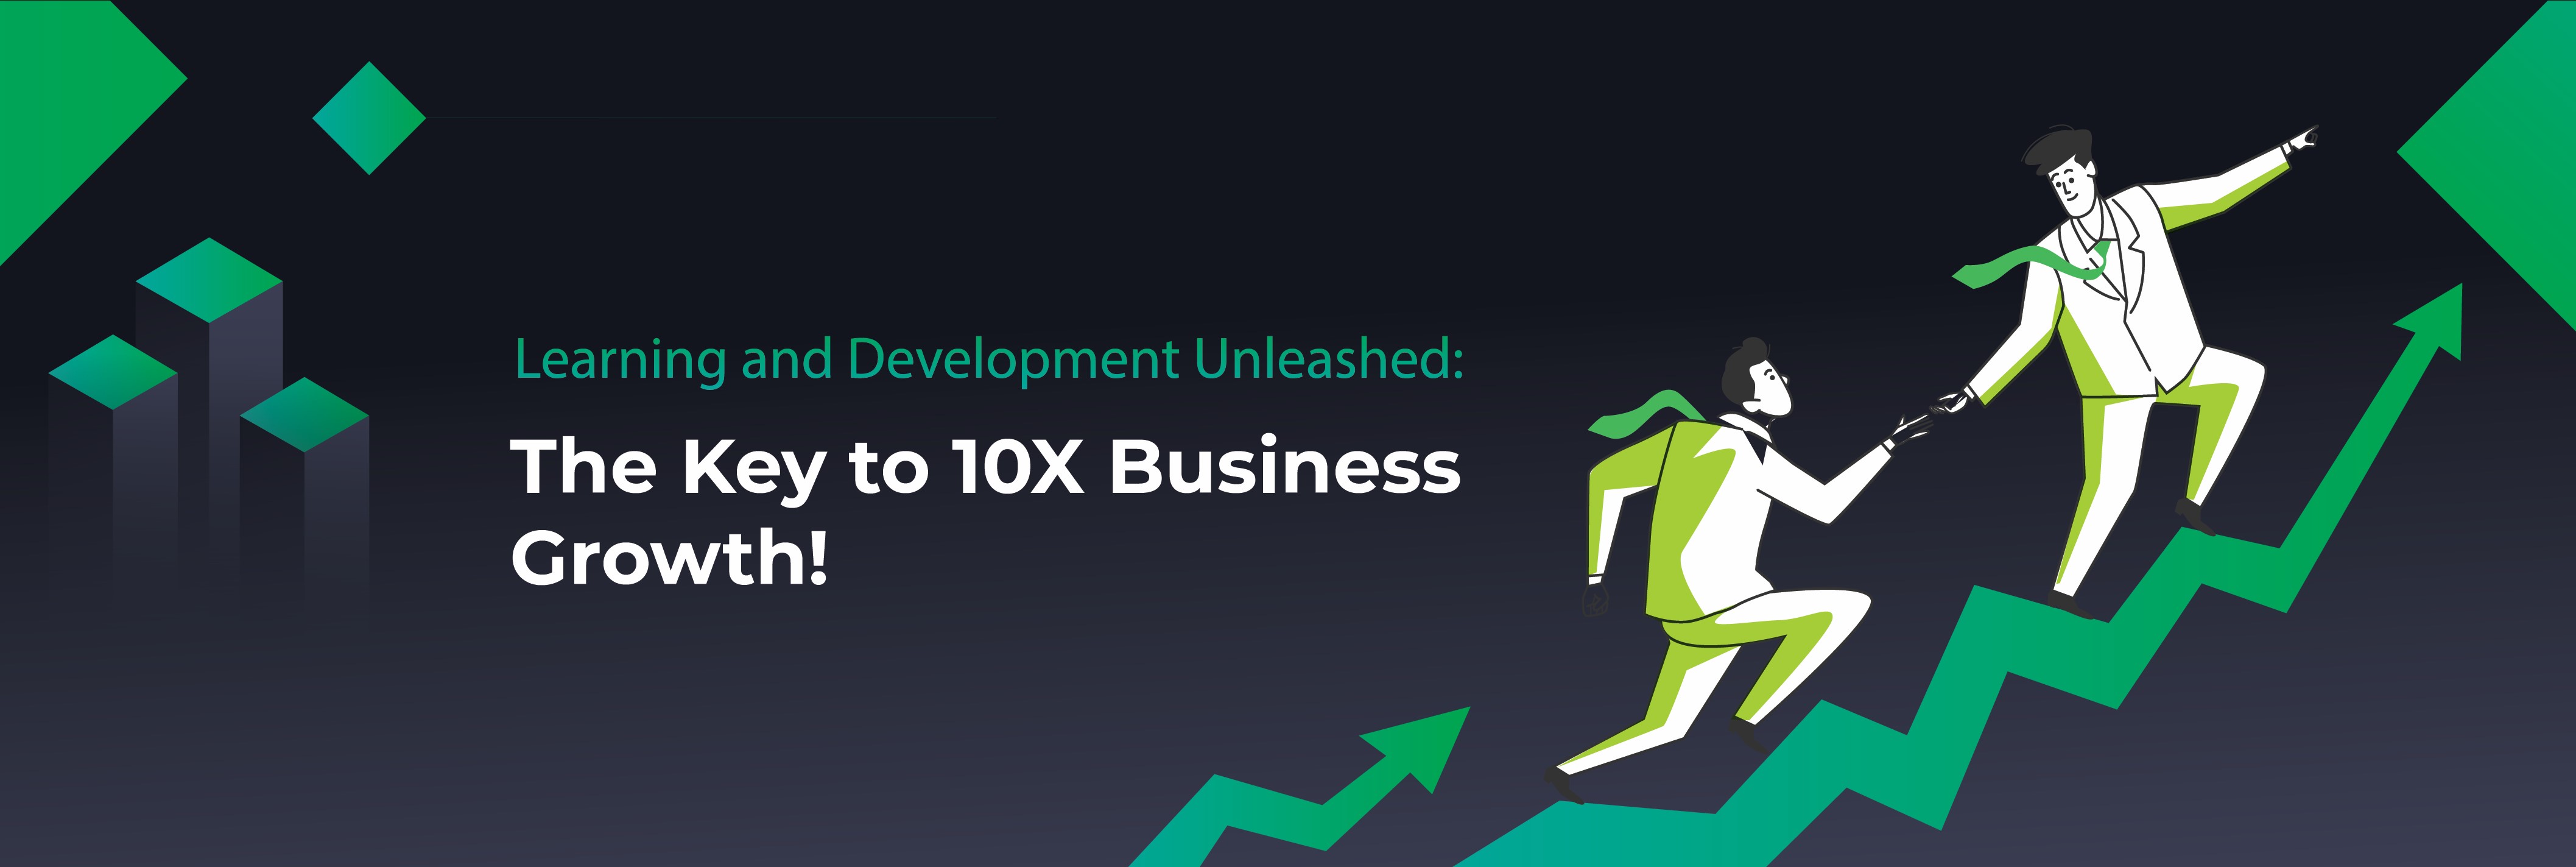 Learning and Development Unleashed: The Key to 10X Business Growth!